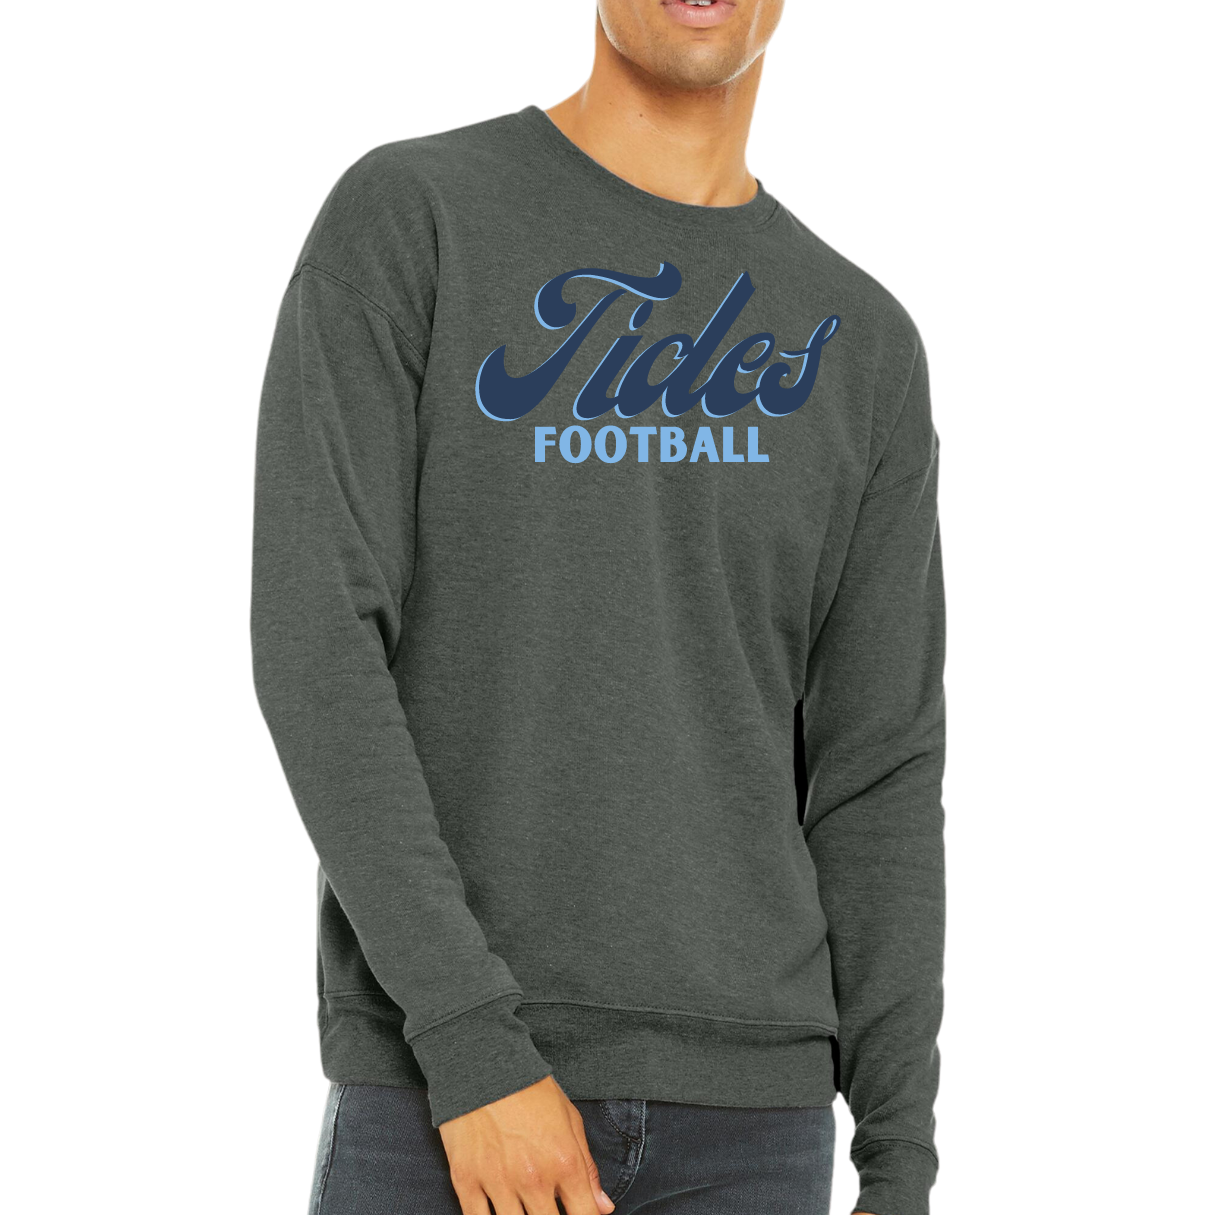 Retro Tides Football Crewneck - Adult and Youth